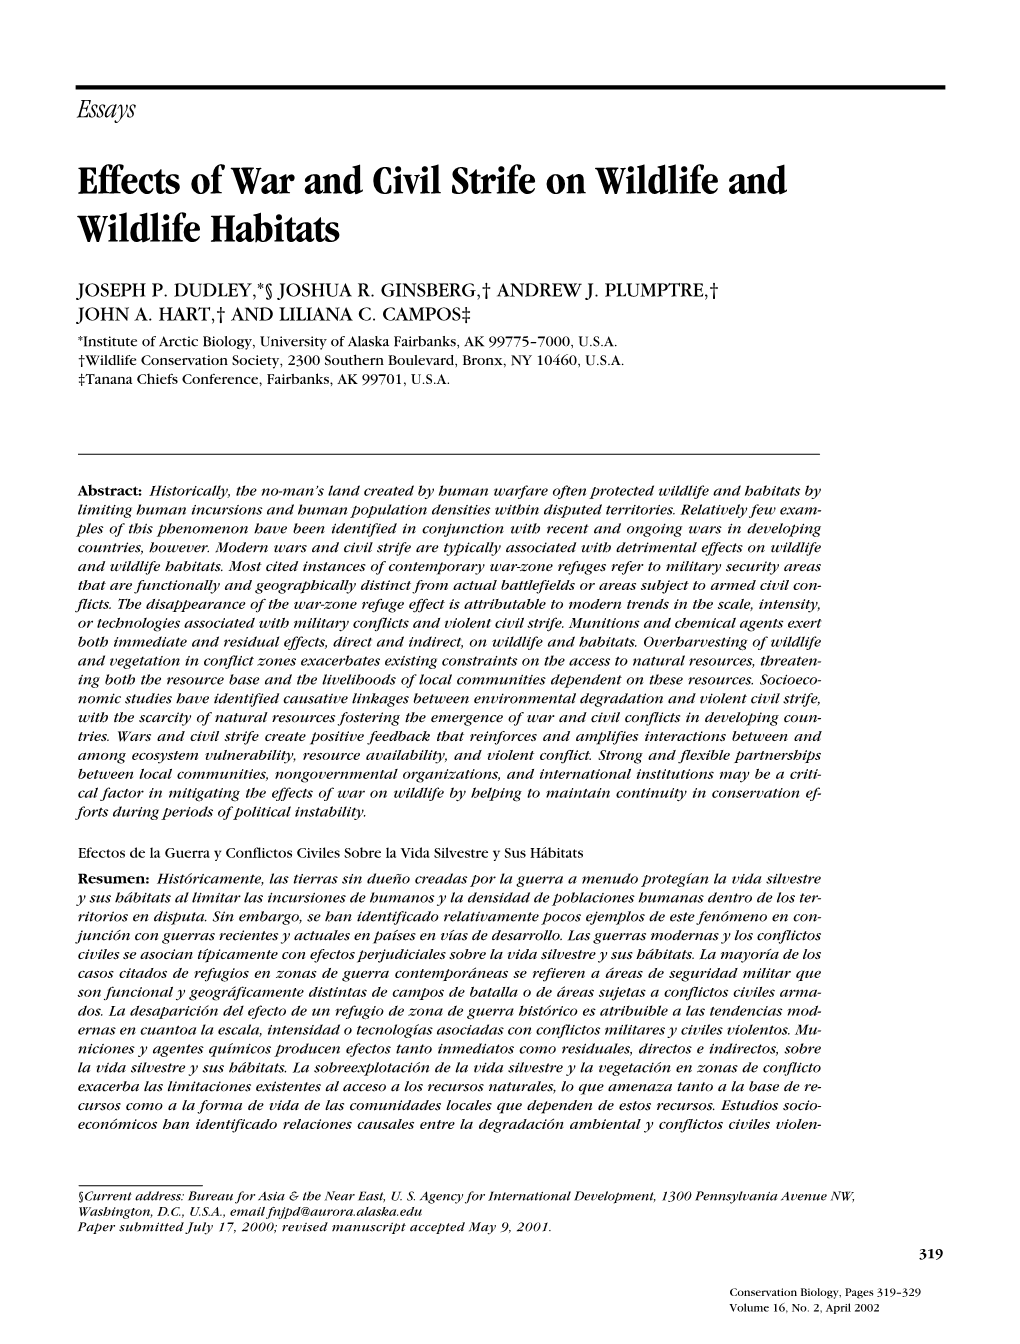 Effects of War and Civil Strife on Wildlife and Wildlife Habitats